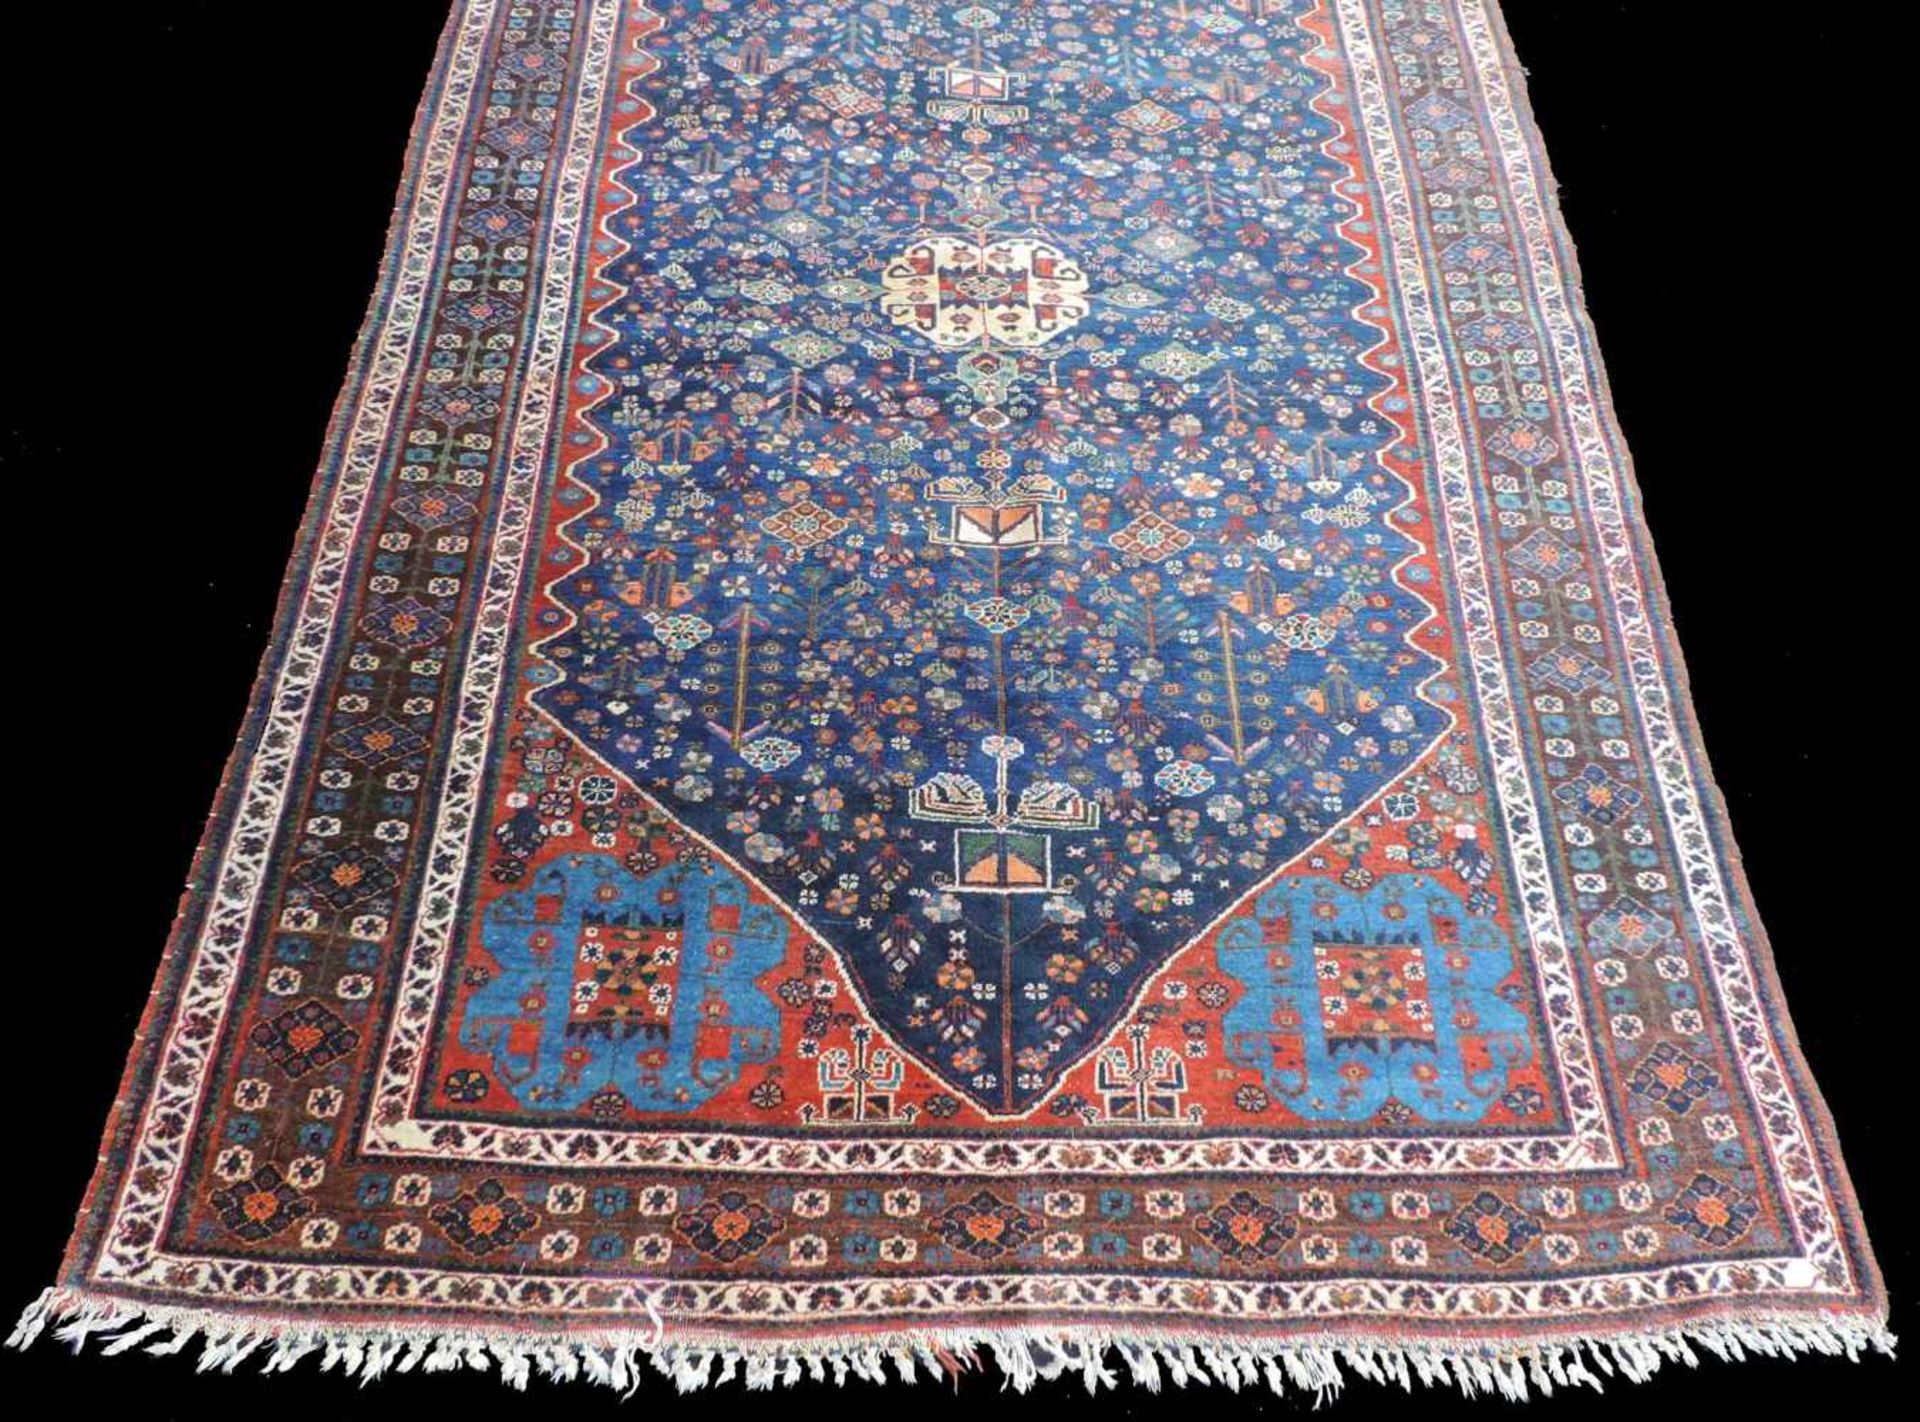 Abadeh Persian carpet. Iran. Old, around 1920. Fine knotting. - Image 2 of 6